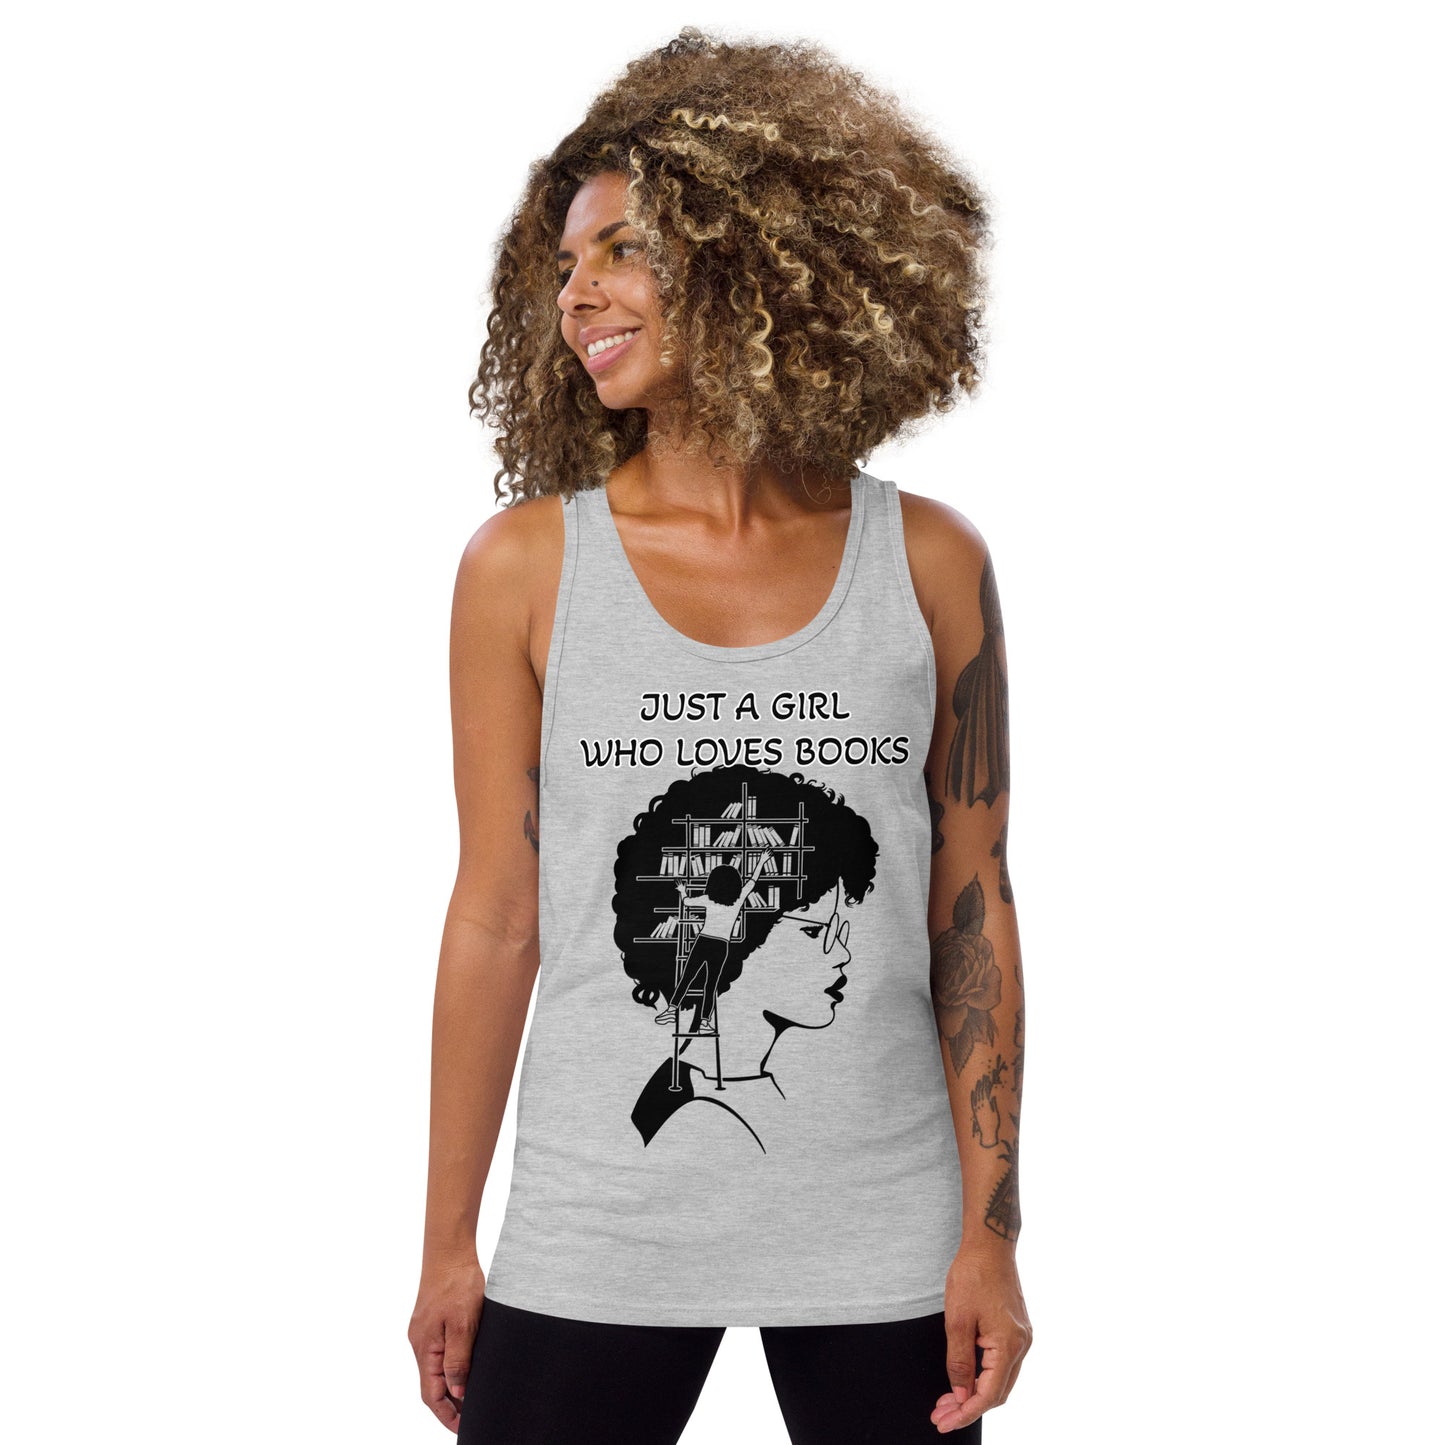 JUST A GIRL WHO LOVES BOOKS- Unisex Tank Top